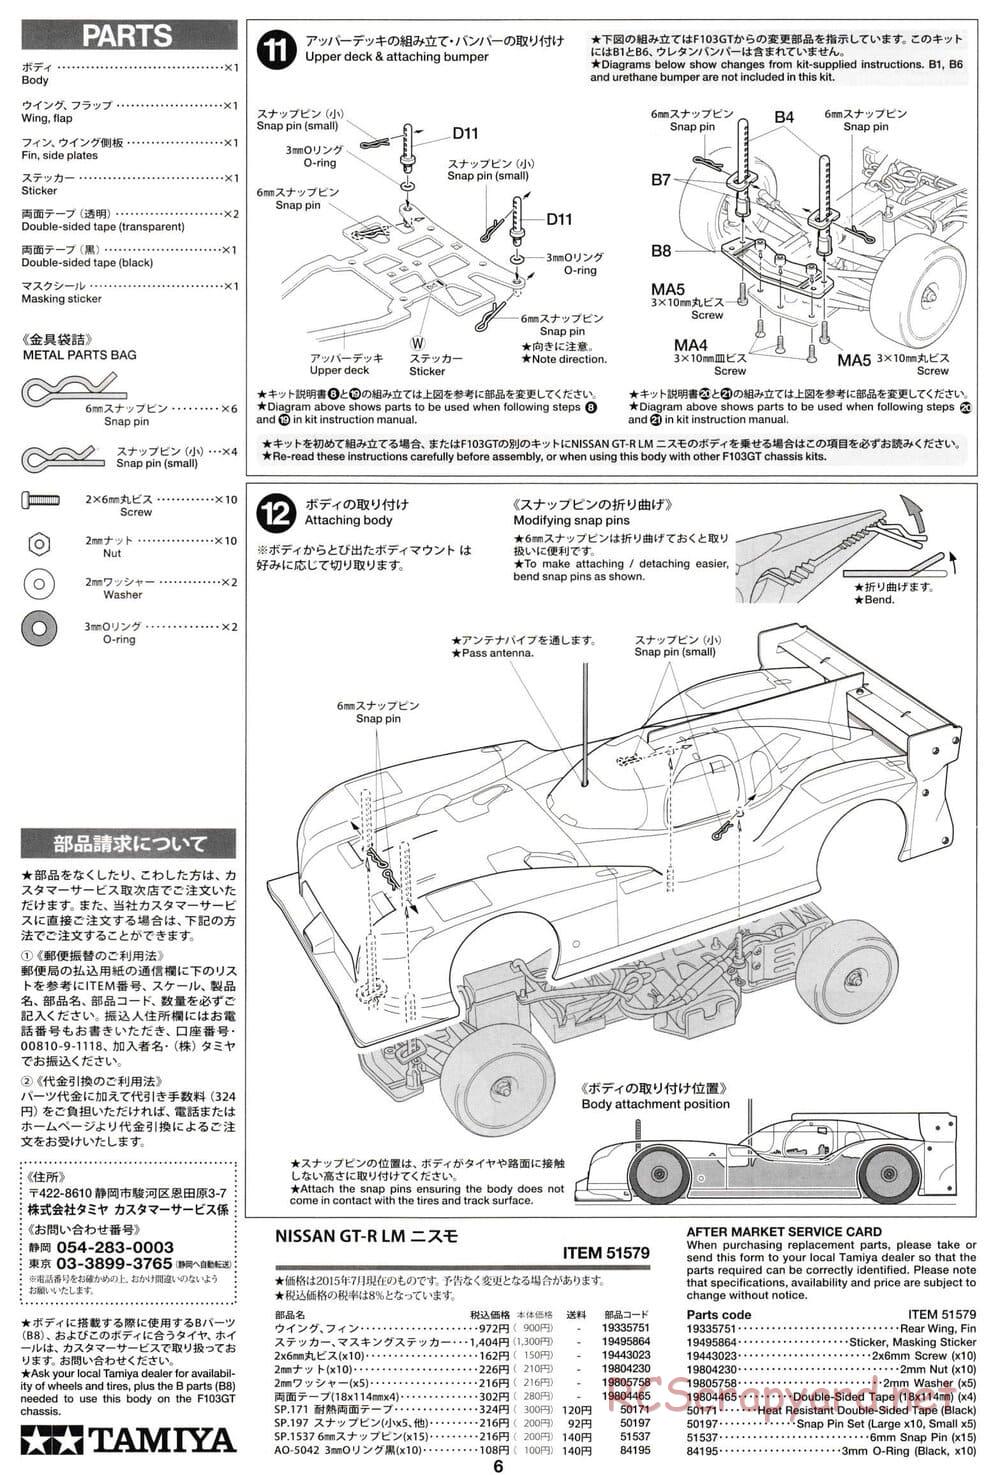 Tamiya - Nissan GT-R LM Nismo Launch Version - F103GT Chassis - Body Manual - Page 6